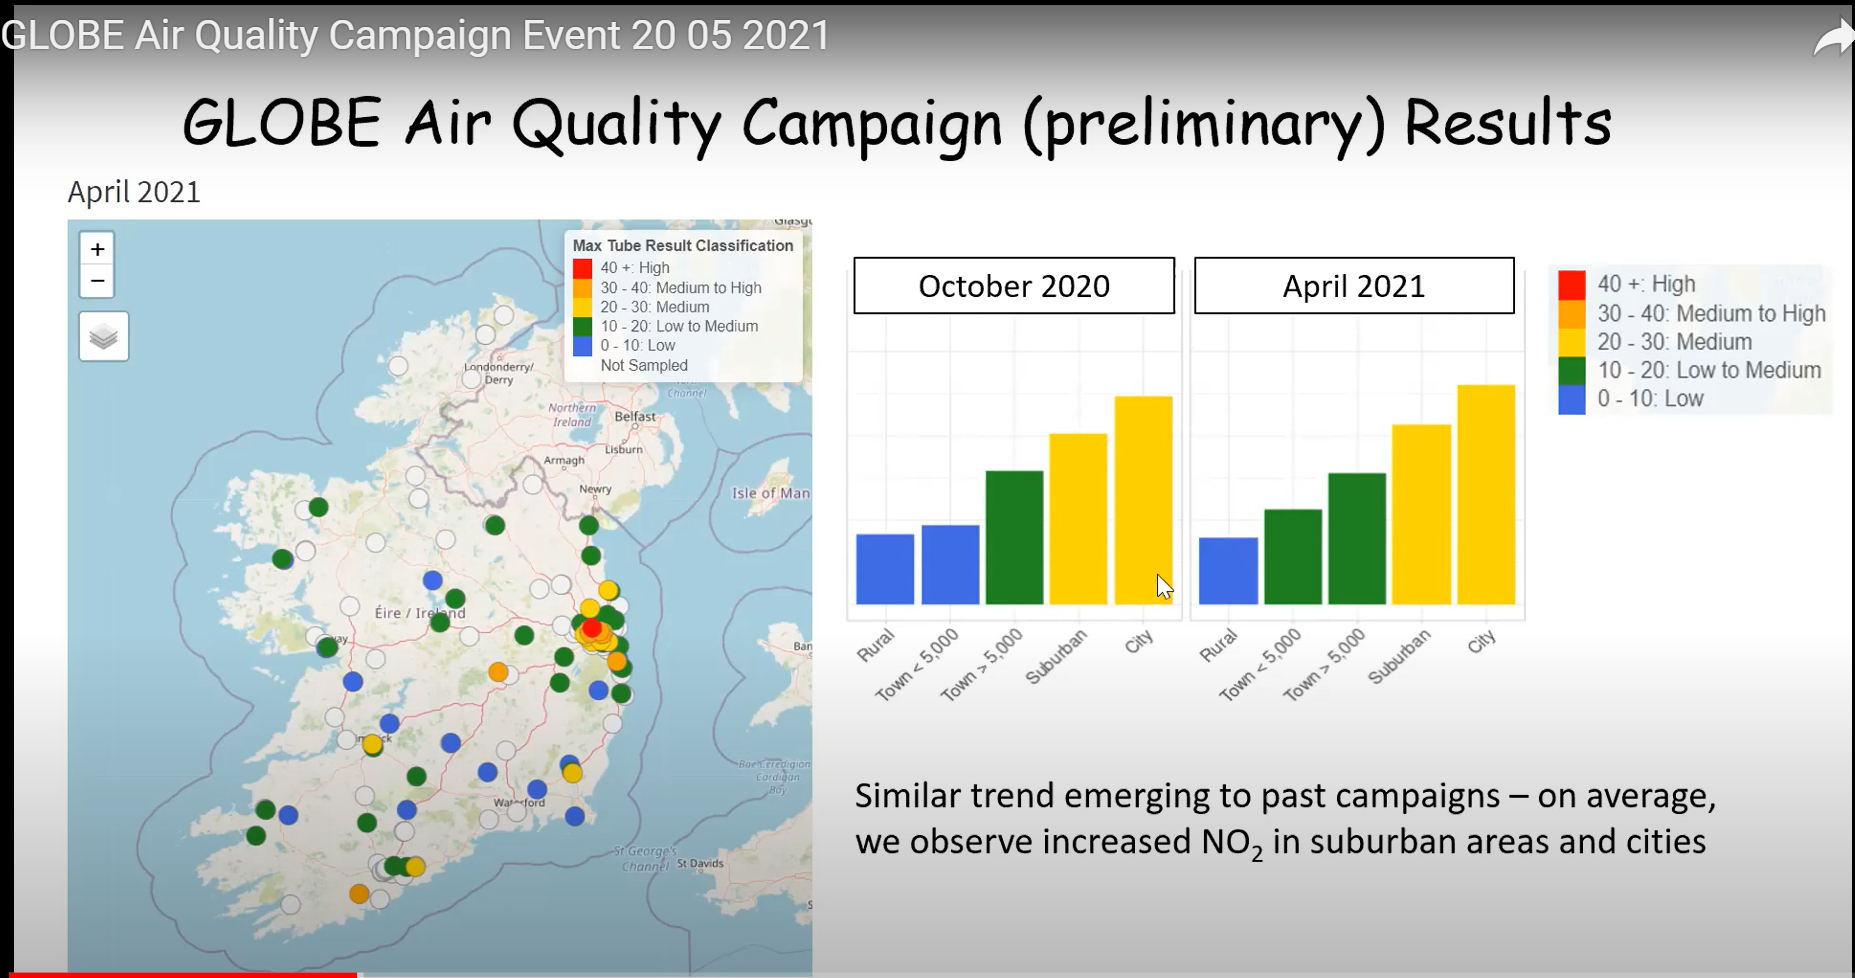 A screenshot from the online event showing the preliminary results of the campaign